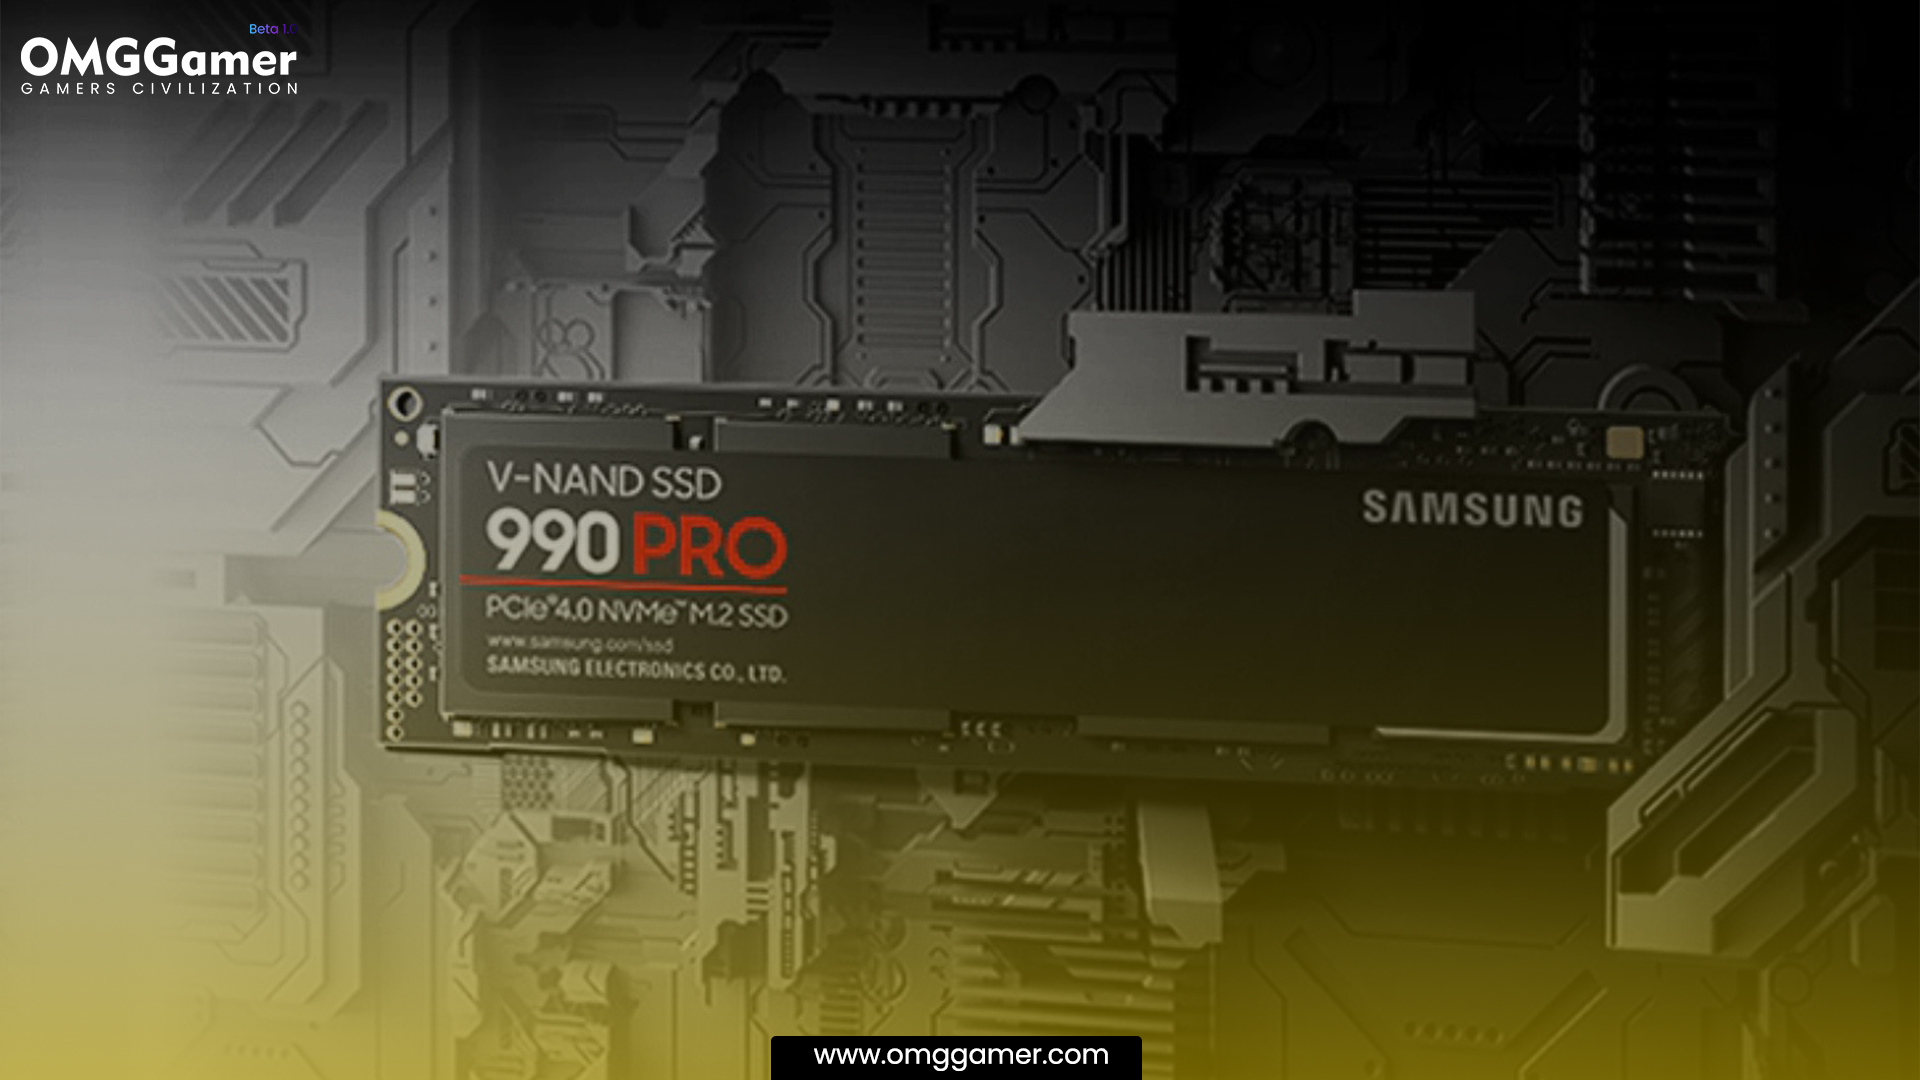 Samsung 990 PRO is good for gaming pc